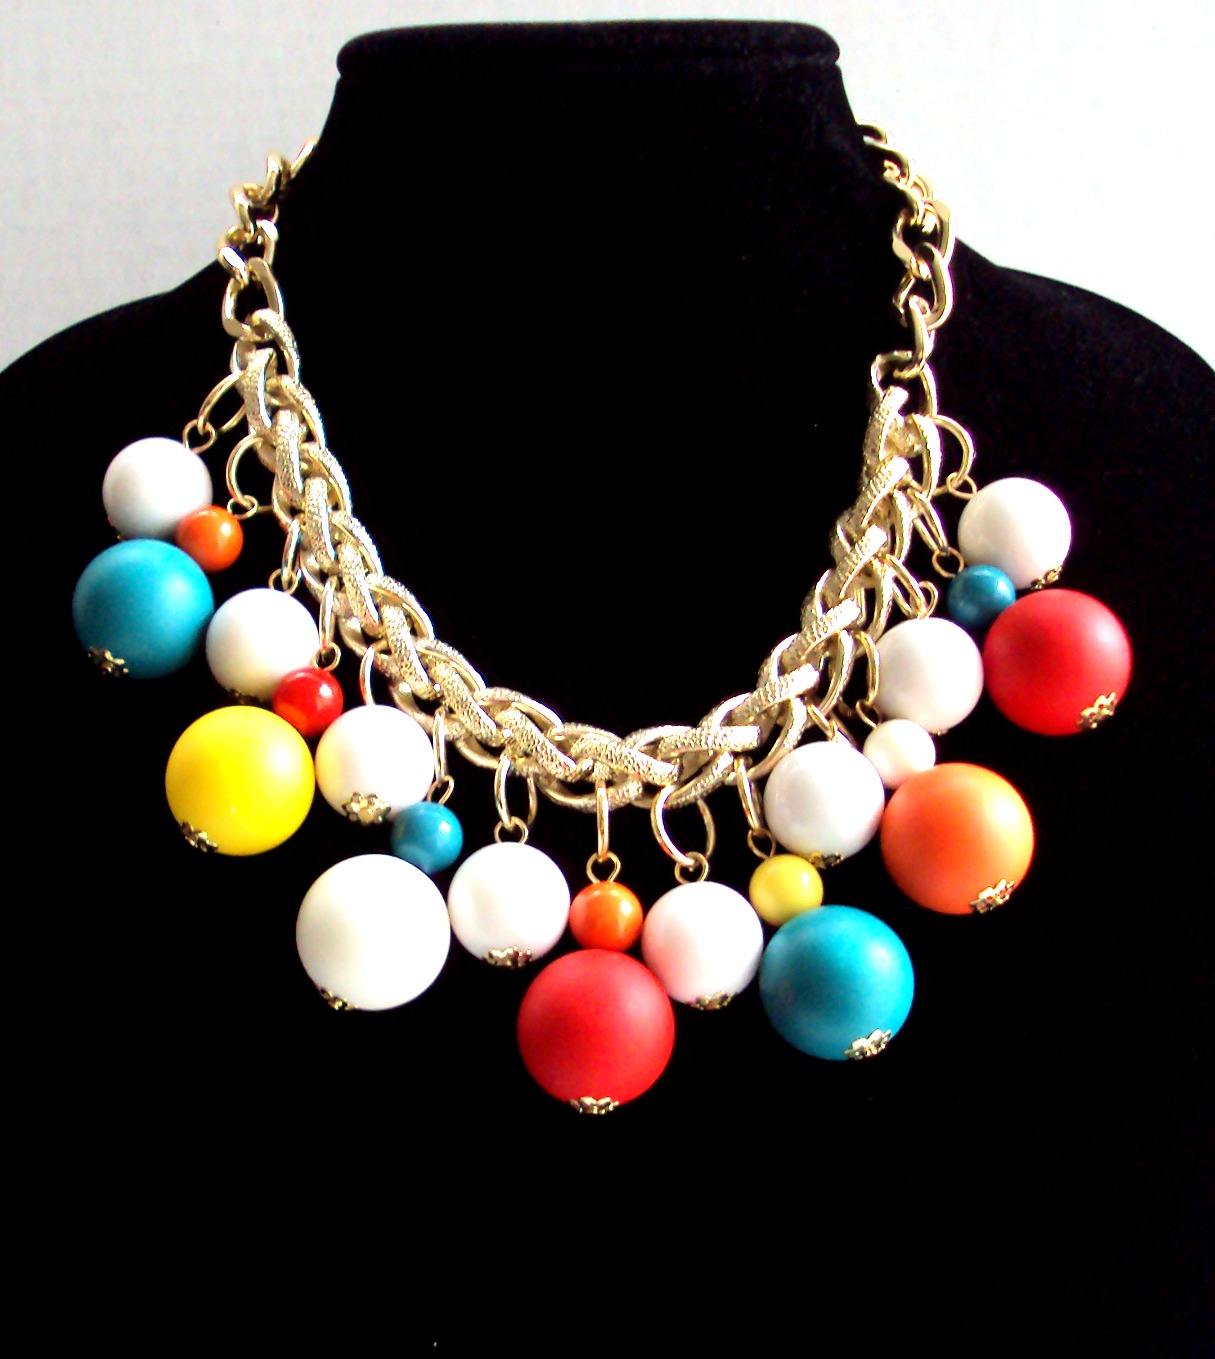 Colorful Bubble Beads Necklace, Charm Necklace Statement Fashion Necklace